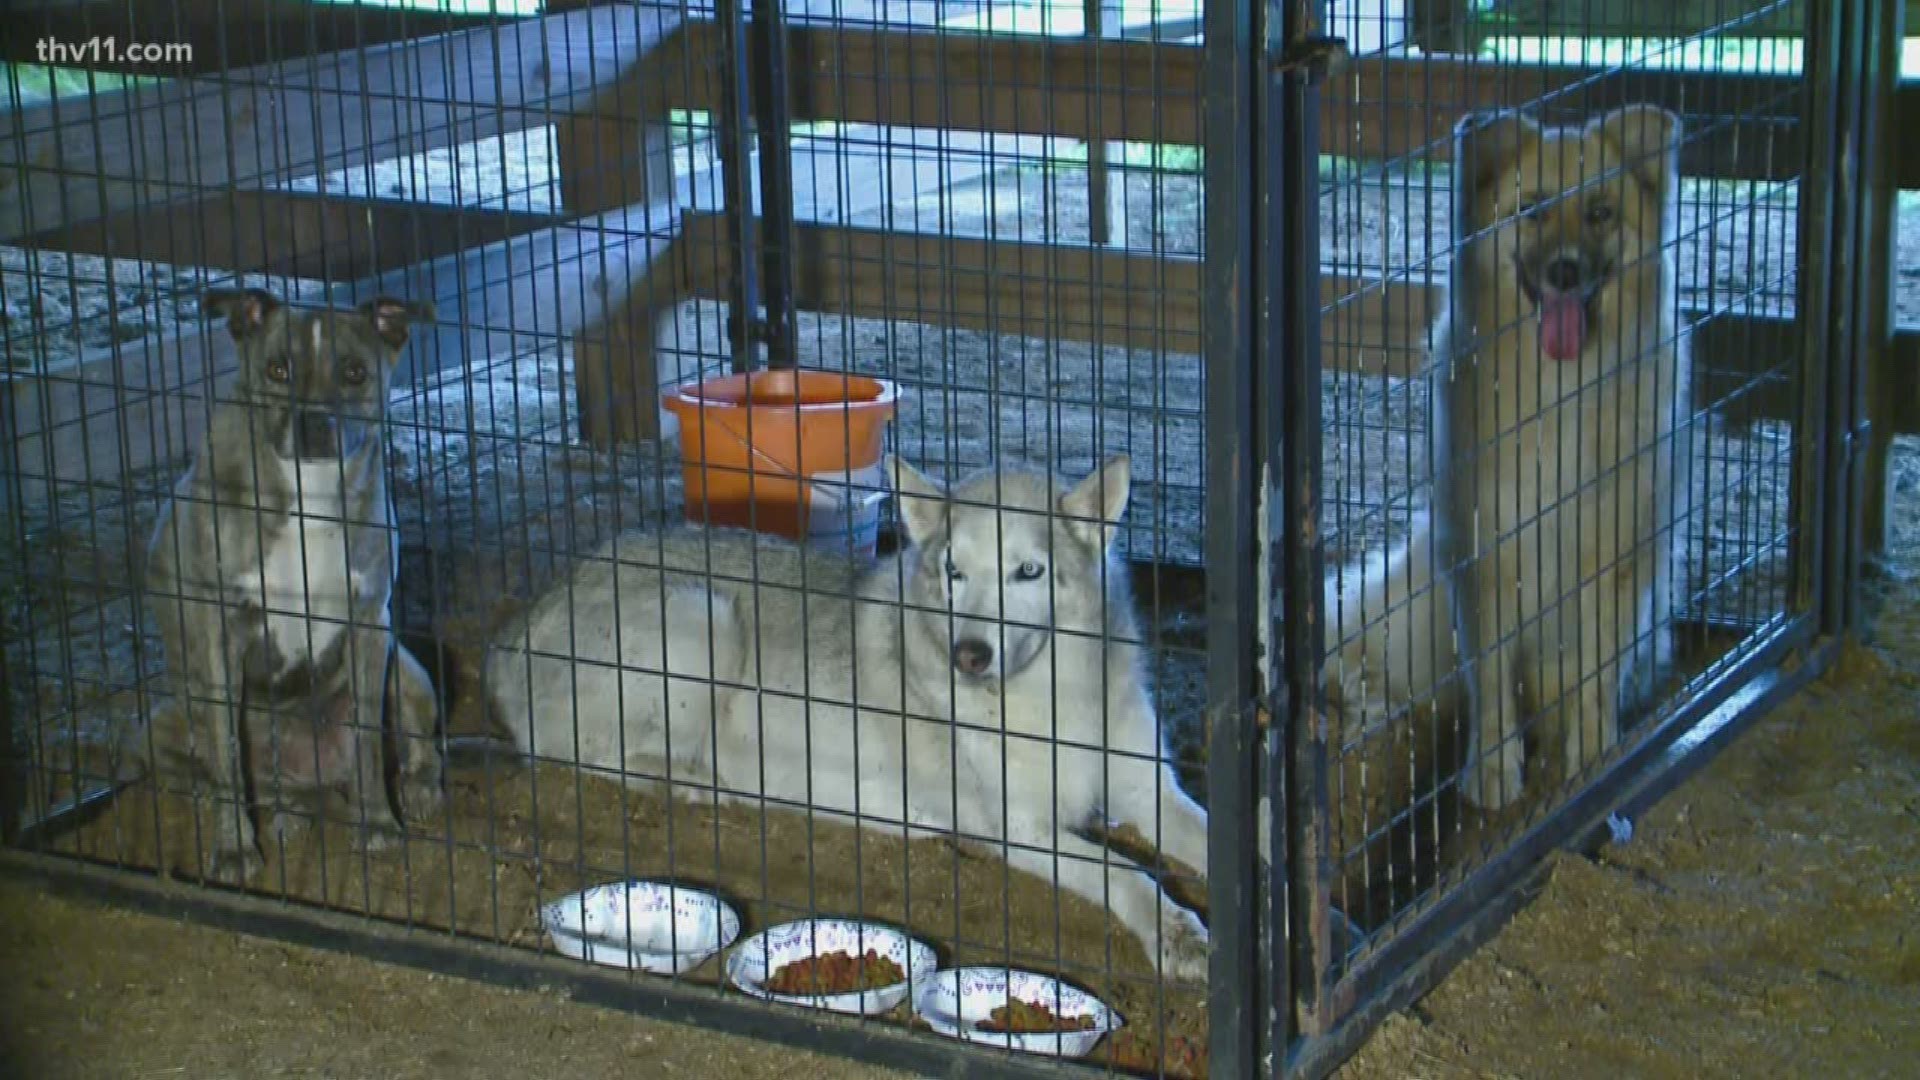 Shelters have been set up across the state for people needing a place to go, and one shelter in Conway is also taking in pets in need of a safe haven.